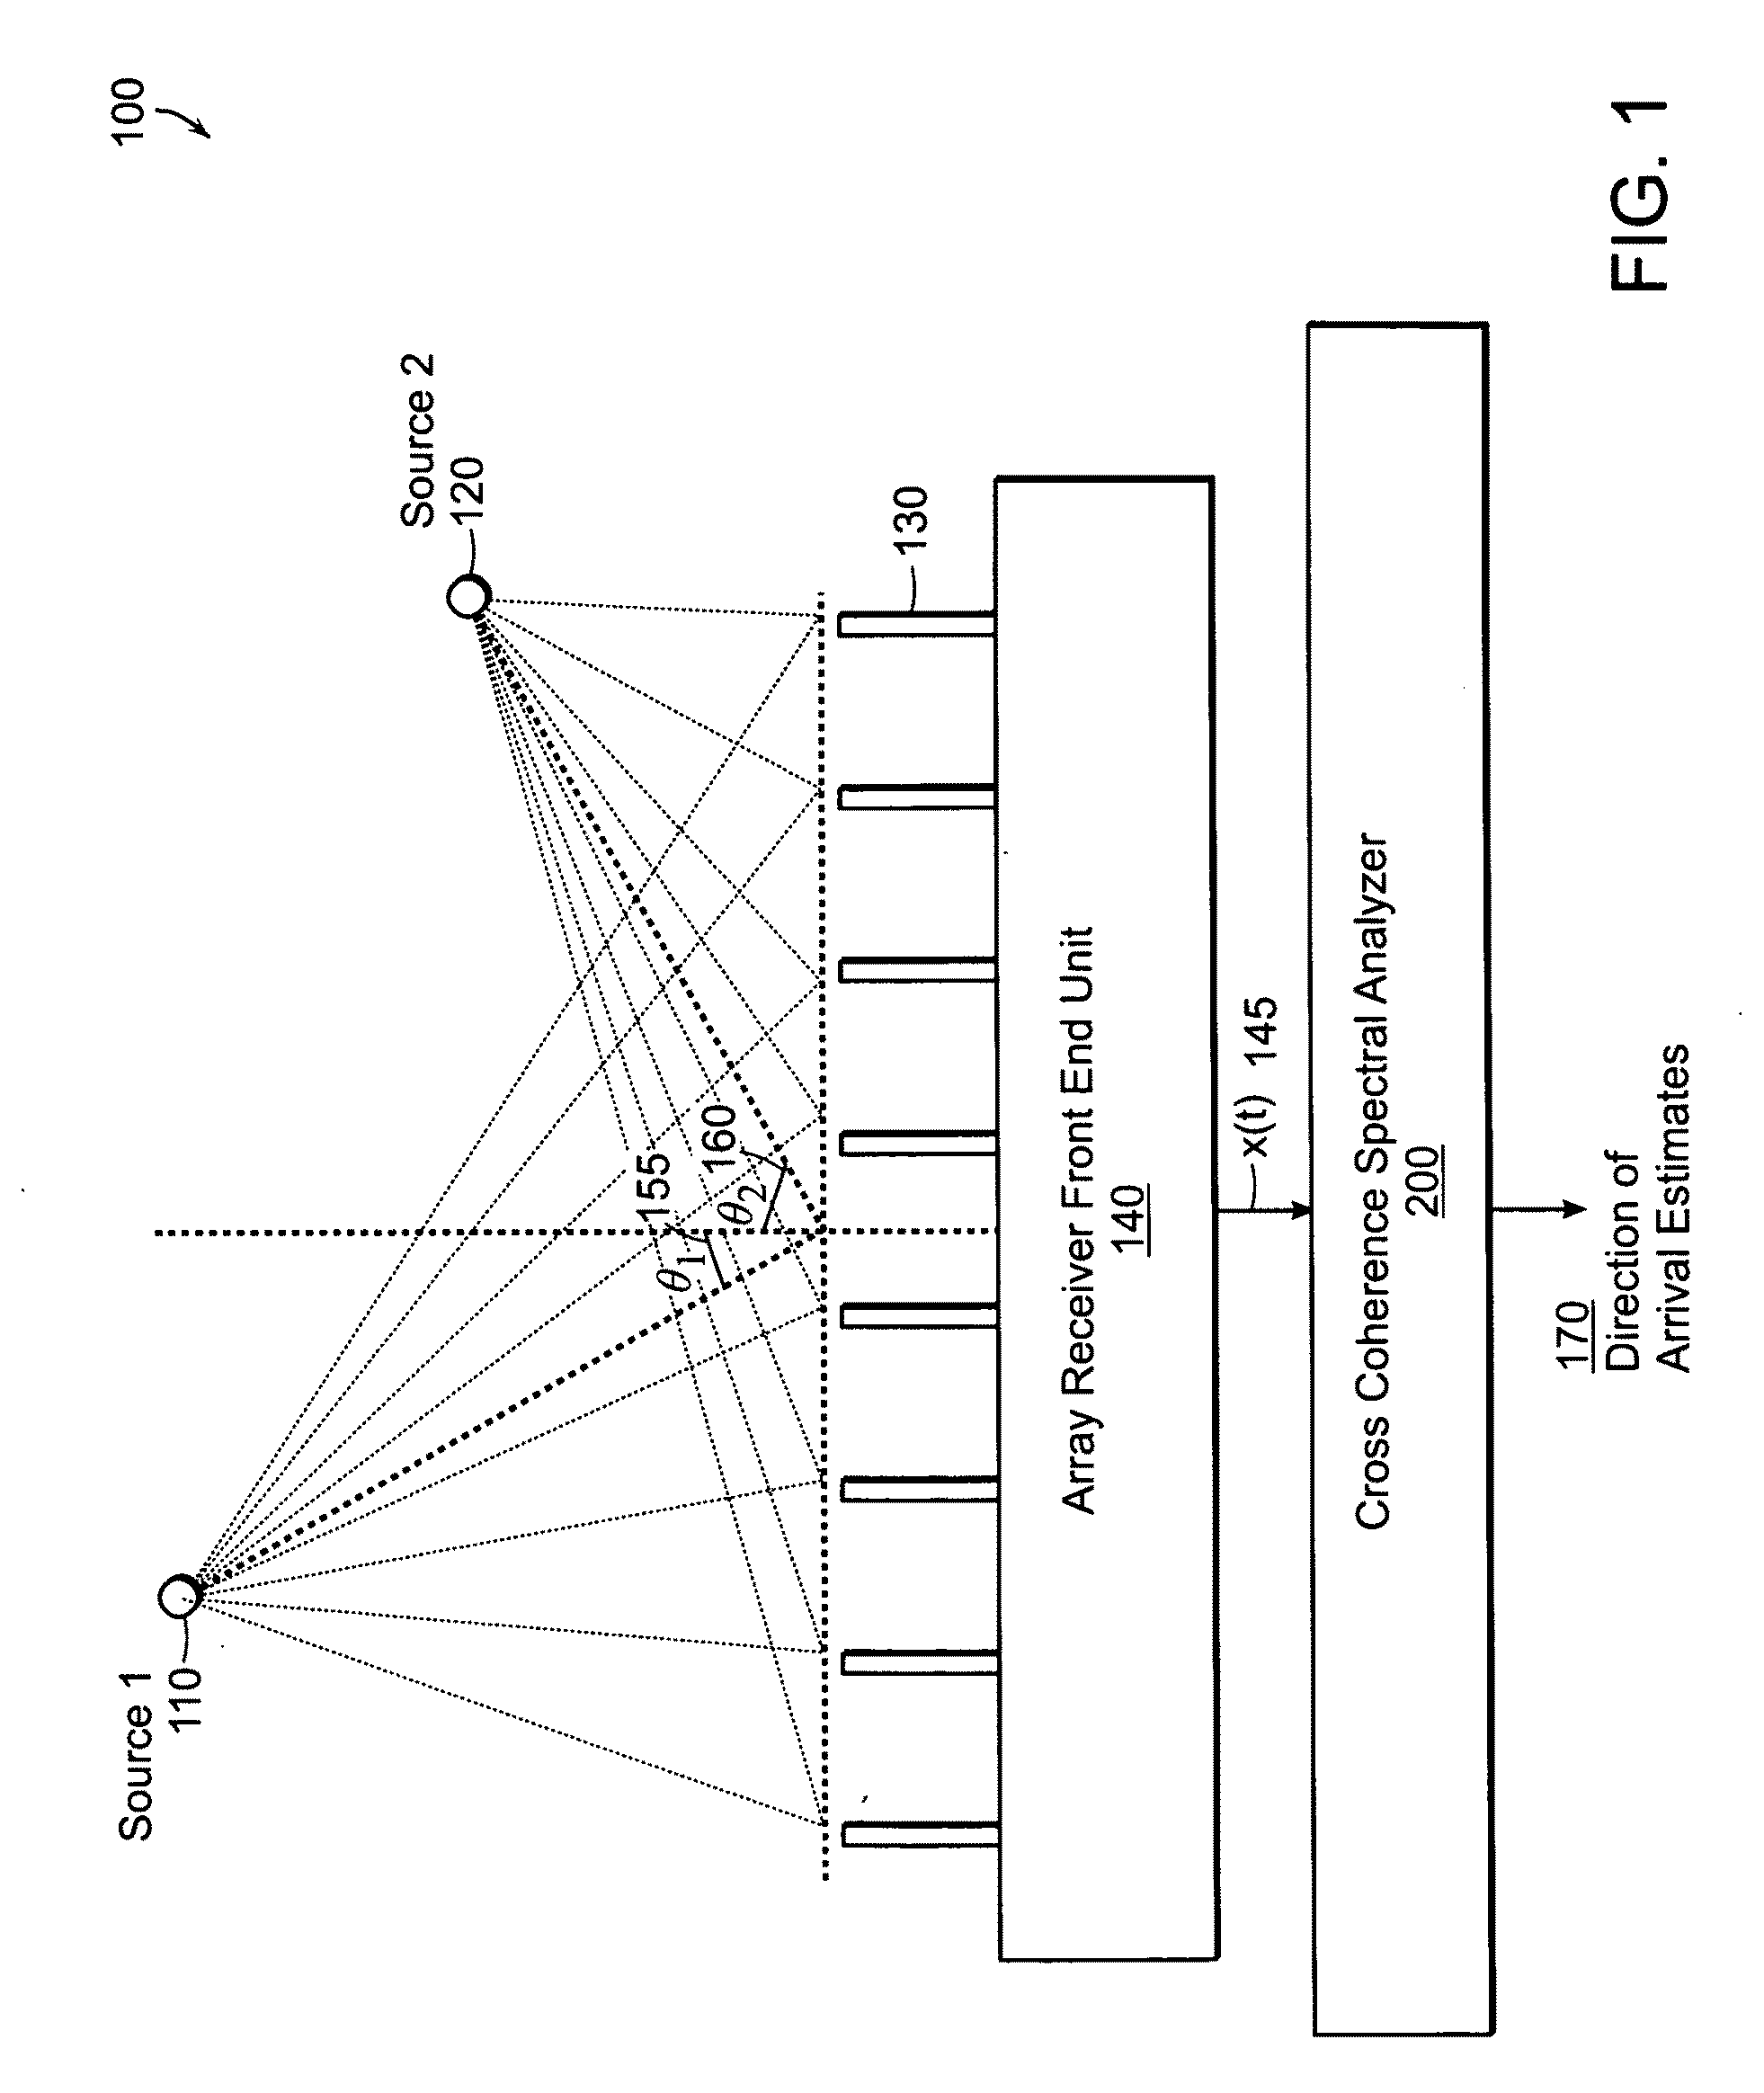 Method and Apparatus for Spectral Cross Coherence